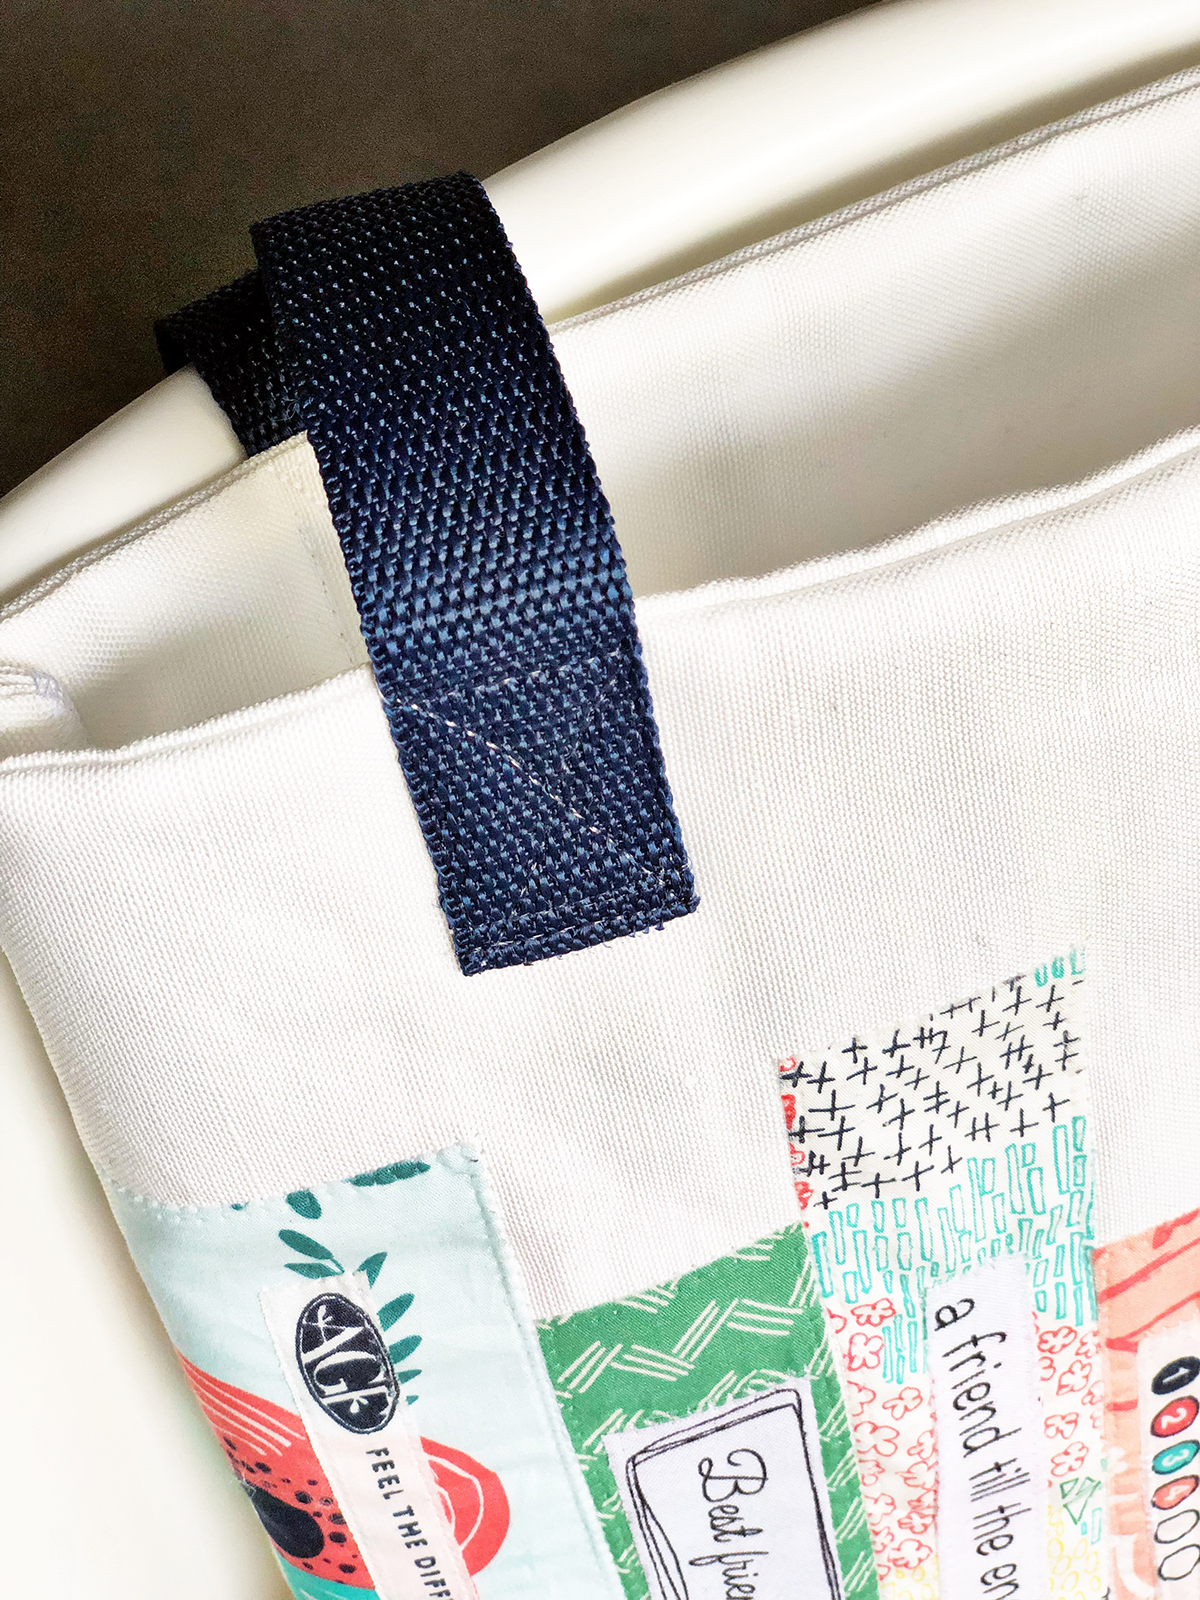 Library Book Tote and Pencil Case: Sew the straps